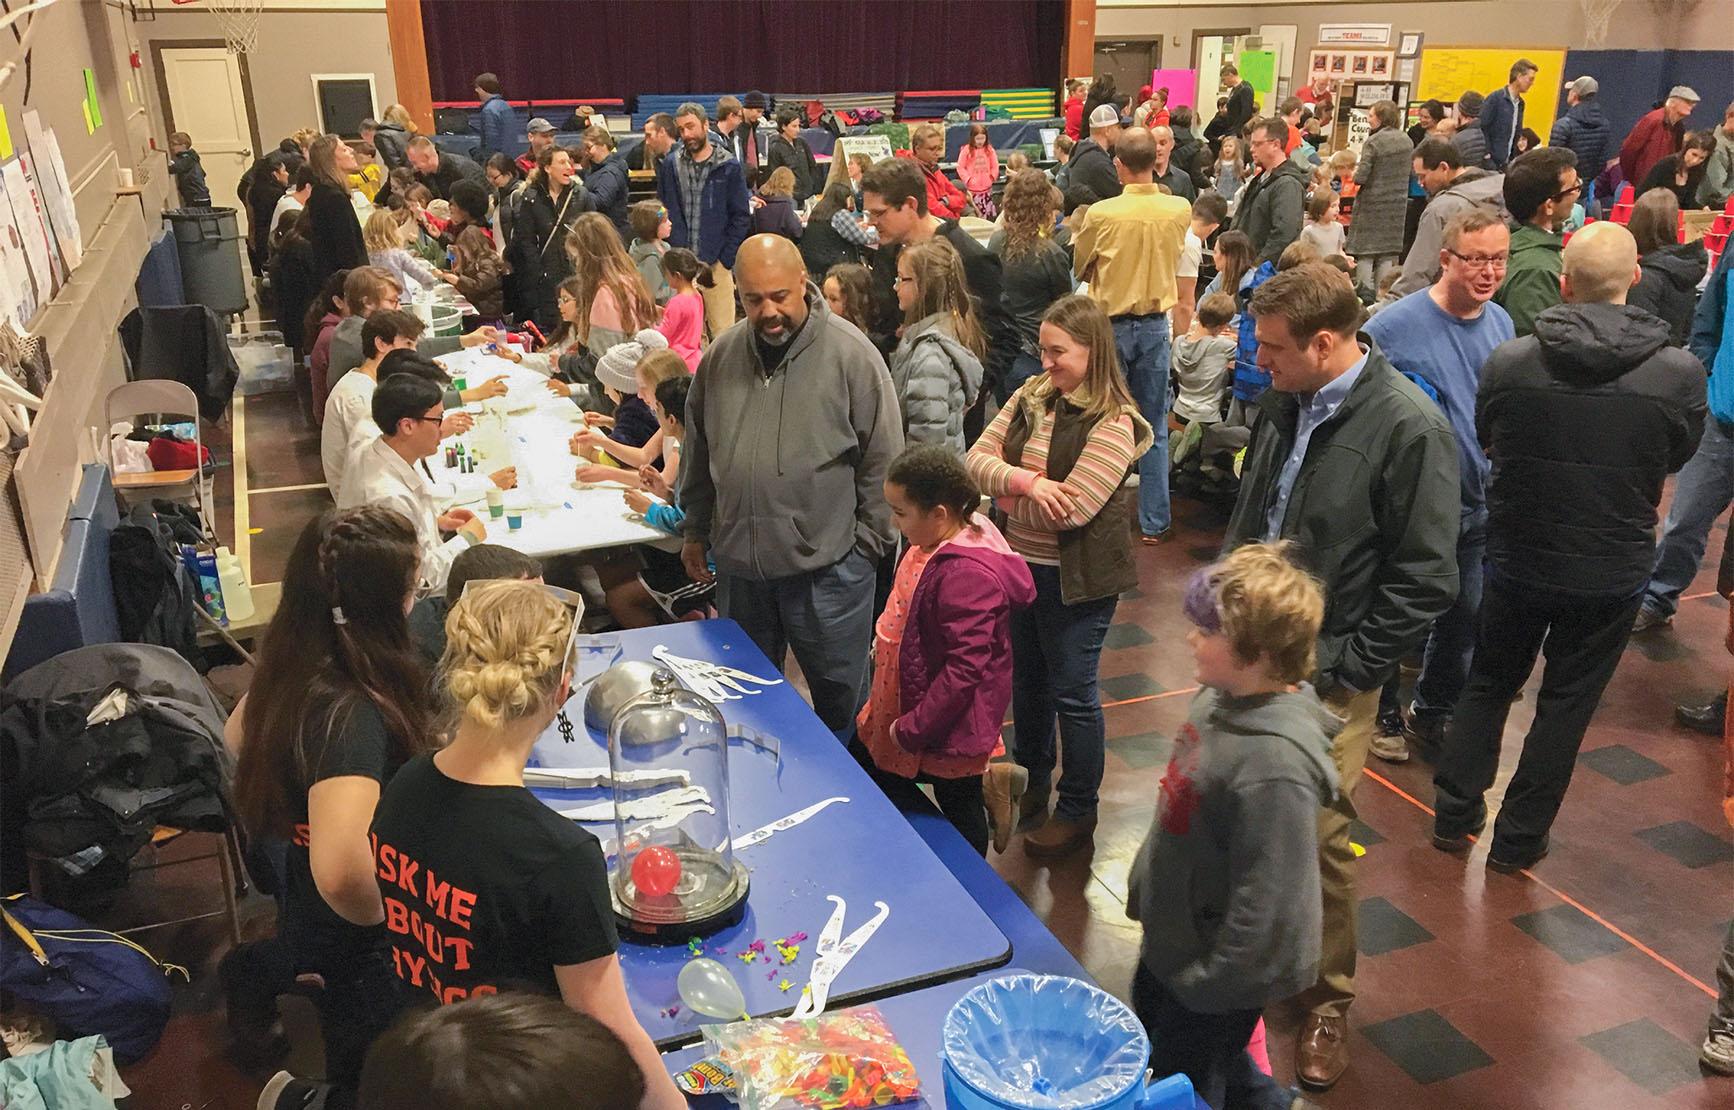 Science outreach event at a school